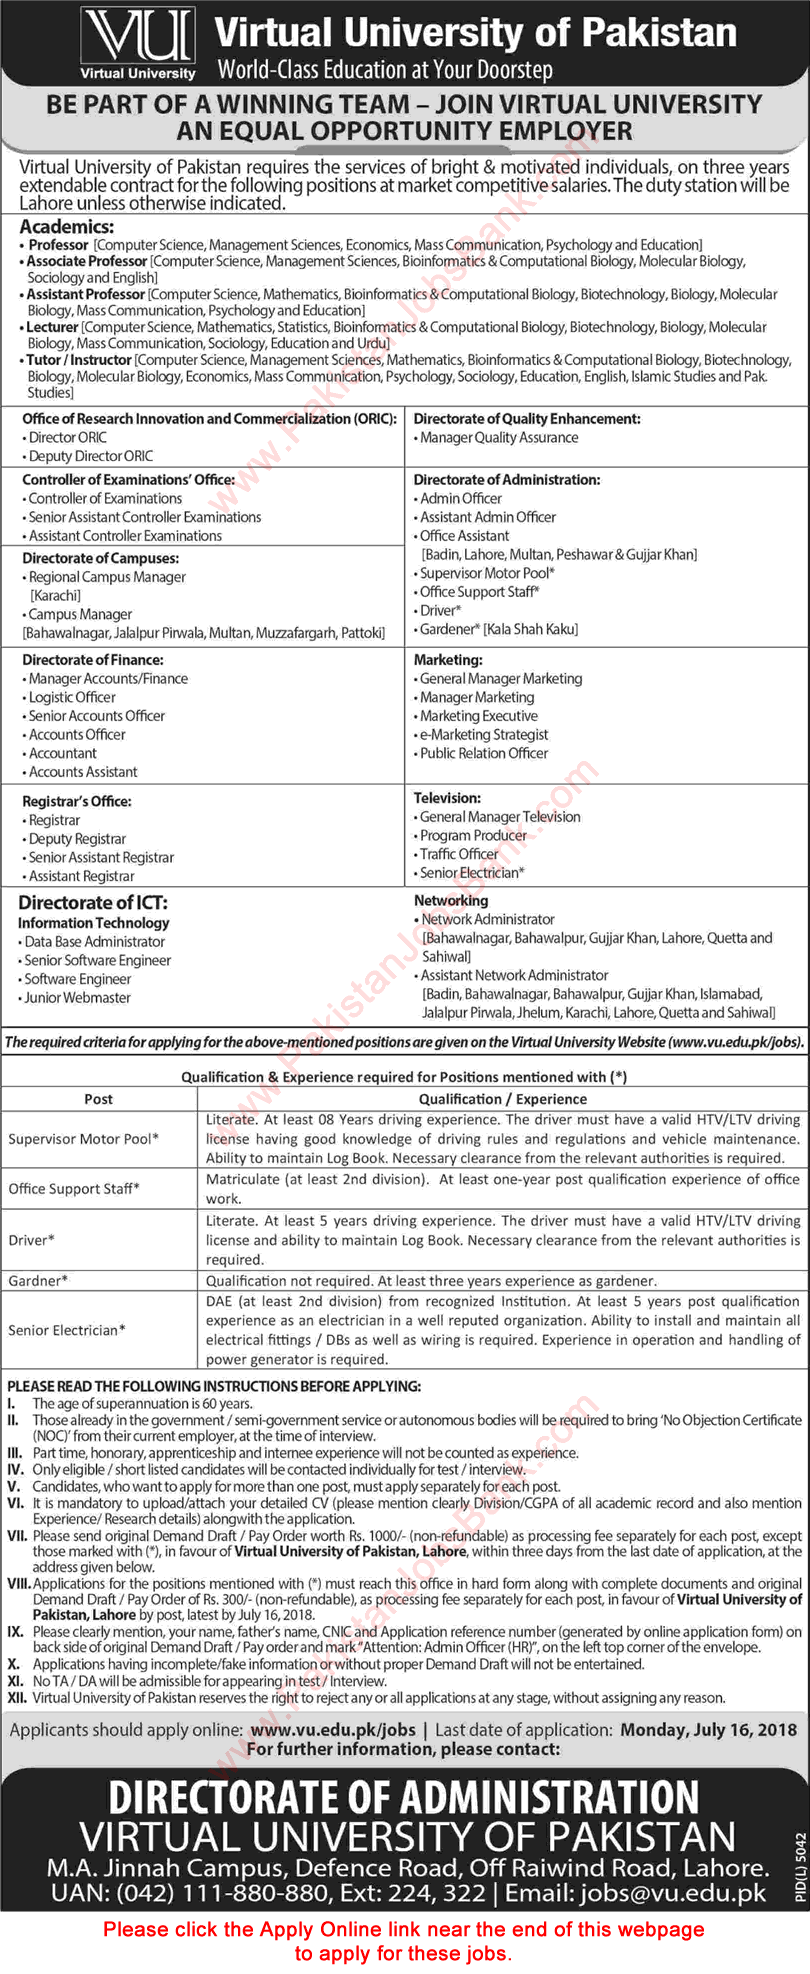 Virtual University Jobs July 2018 Apply Online Teaching Faculty, Admin & Support Staff Latest